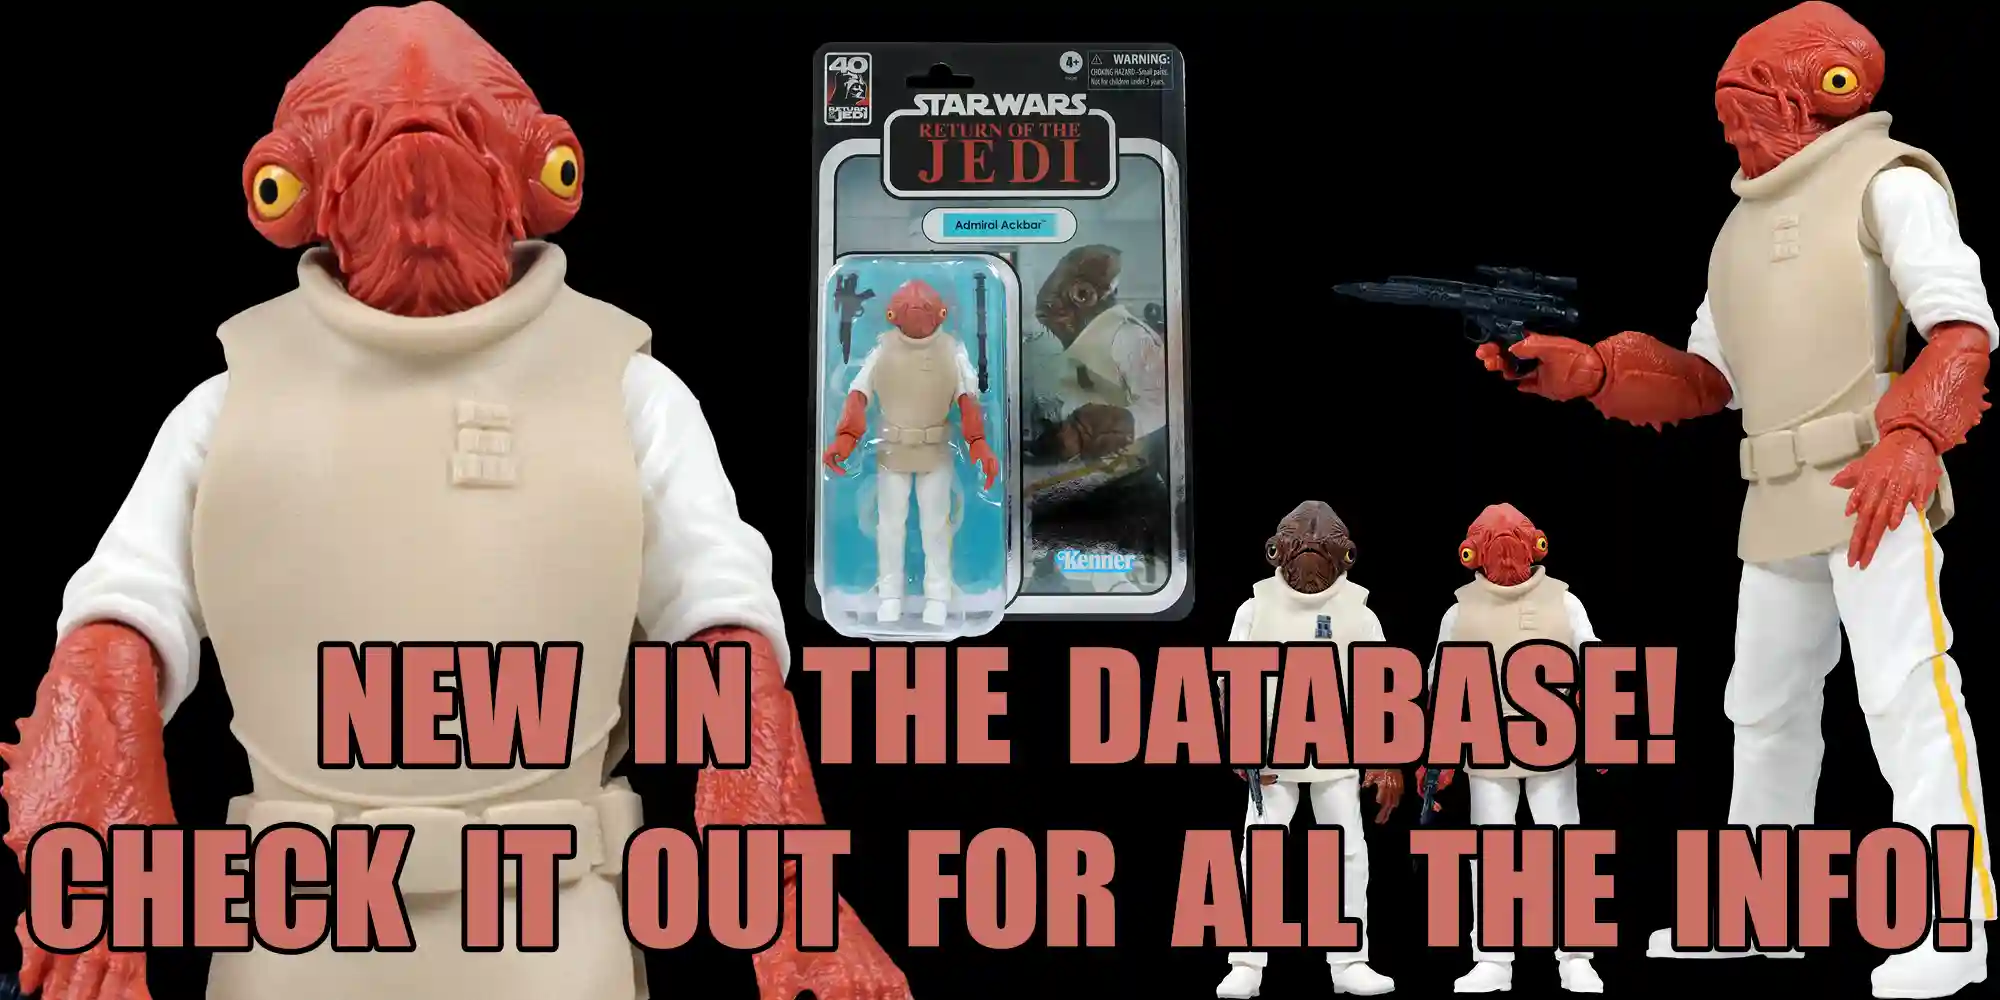 Black Series Admiral Ackbar Added - Check It Out!